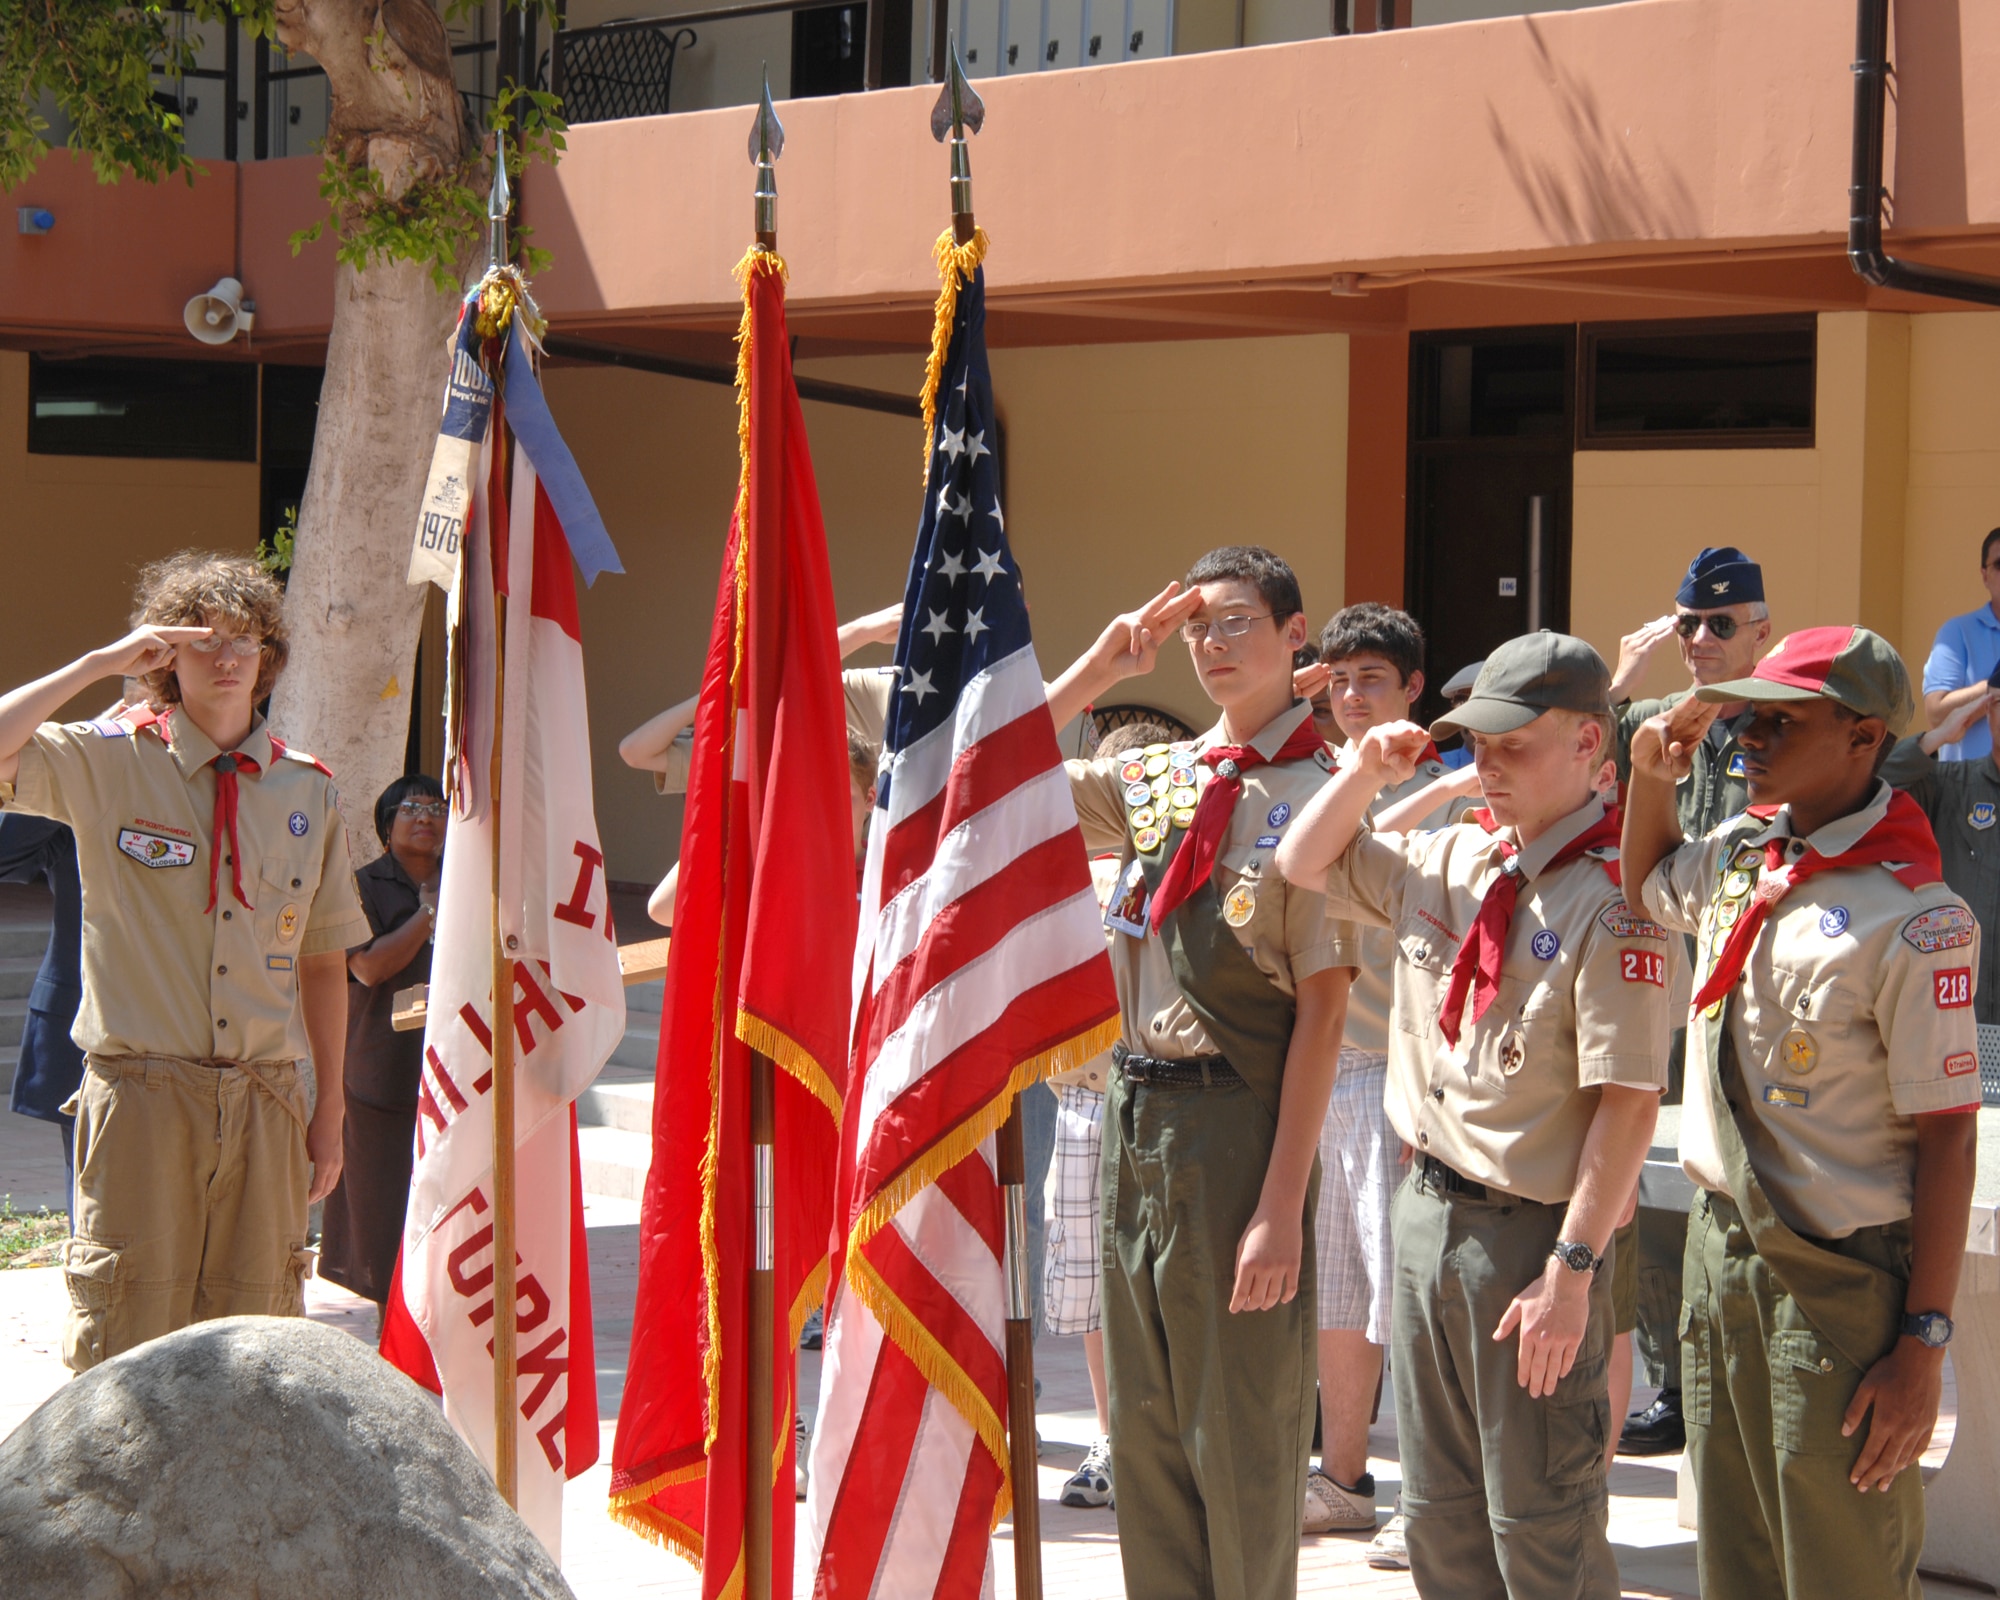 Members of Boy Scout troop 218, as well as an on looking crowd salute the colors Wednesday, June 3, 2009 during the Ira Eldridge Memorial Re-dedication Ceremony at Incirlik Unit School, Incirlik Air Base, Turkey. The troop honored the memory of Eagle Scout Eldridge who died in 2001 of leukemia. Ira Eldridge was also the class of 1999 valedictorian at Incirlik Unit School, vice president of the Incirlik Unit School National Honor Society and a member of the varsity soccer team. A memorial plaque was placed on school grounds, but fell into disrepair over the years. The scouts decided it needed to be resurrected and placed in a more prominent location so current and future generations would not forget him. (U.S. Air Force photo/ Staff Sgt. Lauren Padden)